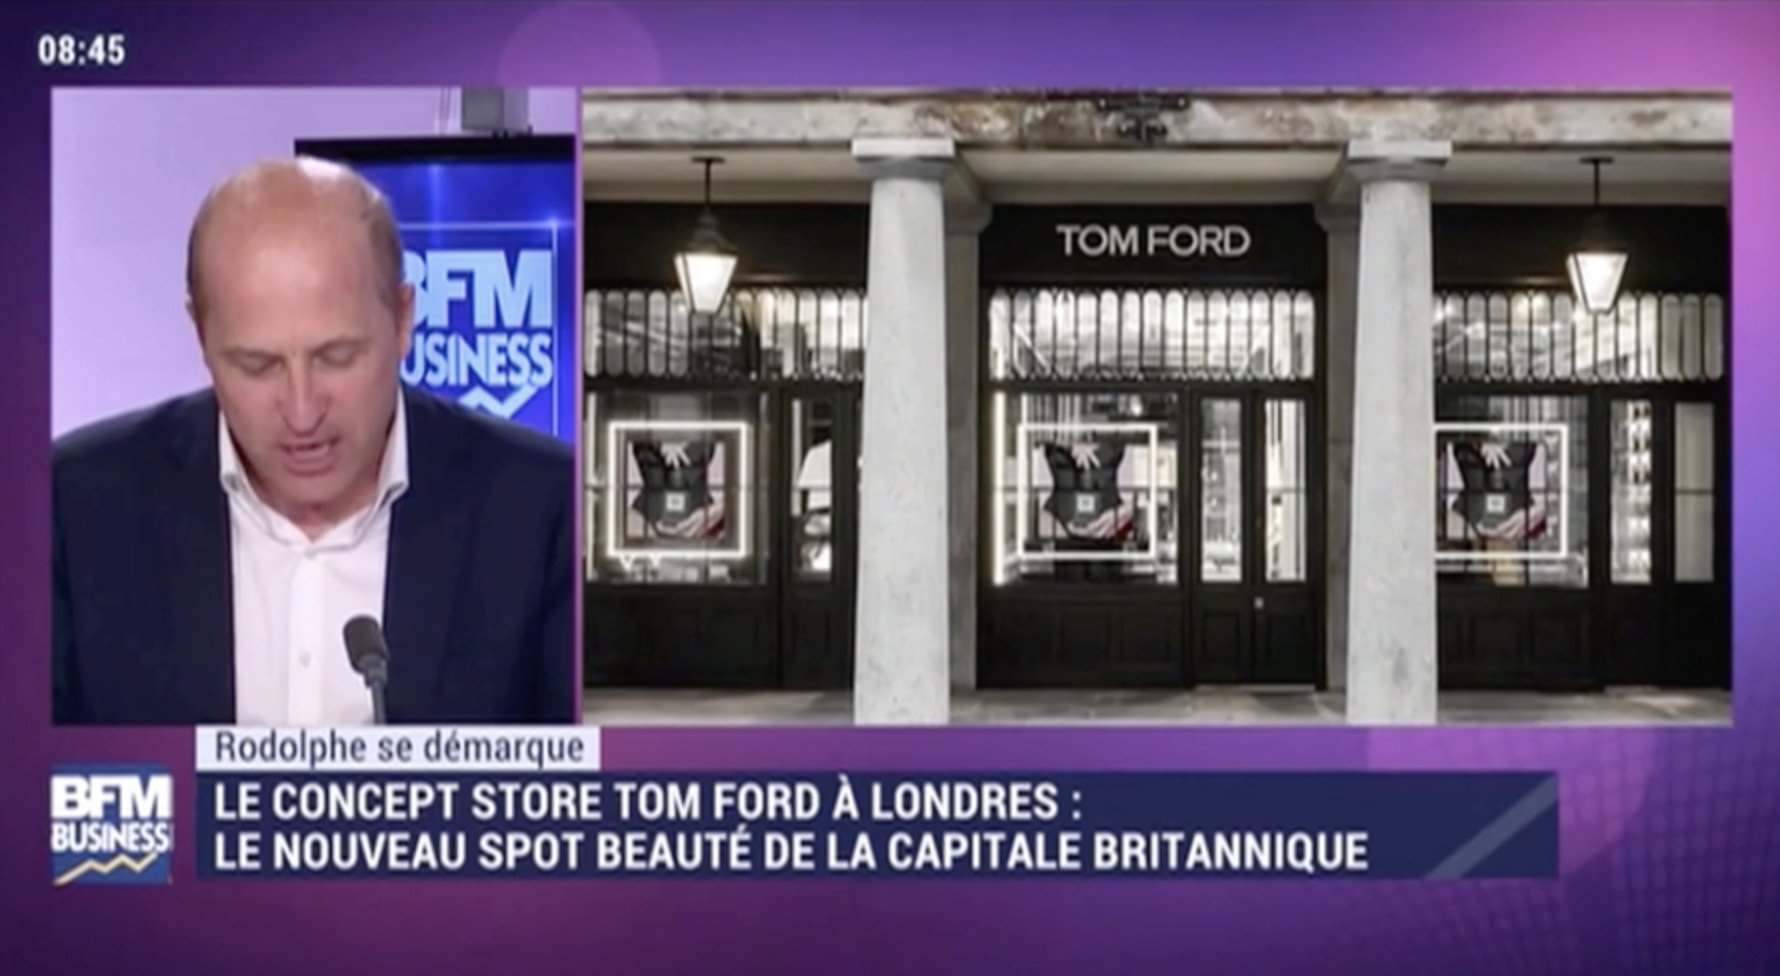 TOM FORD BEAUTY / INNOVER POUR LE COMMERCE